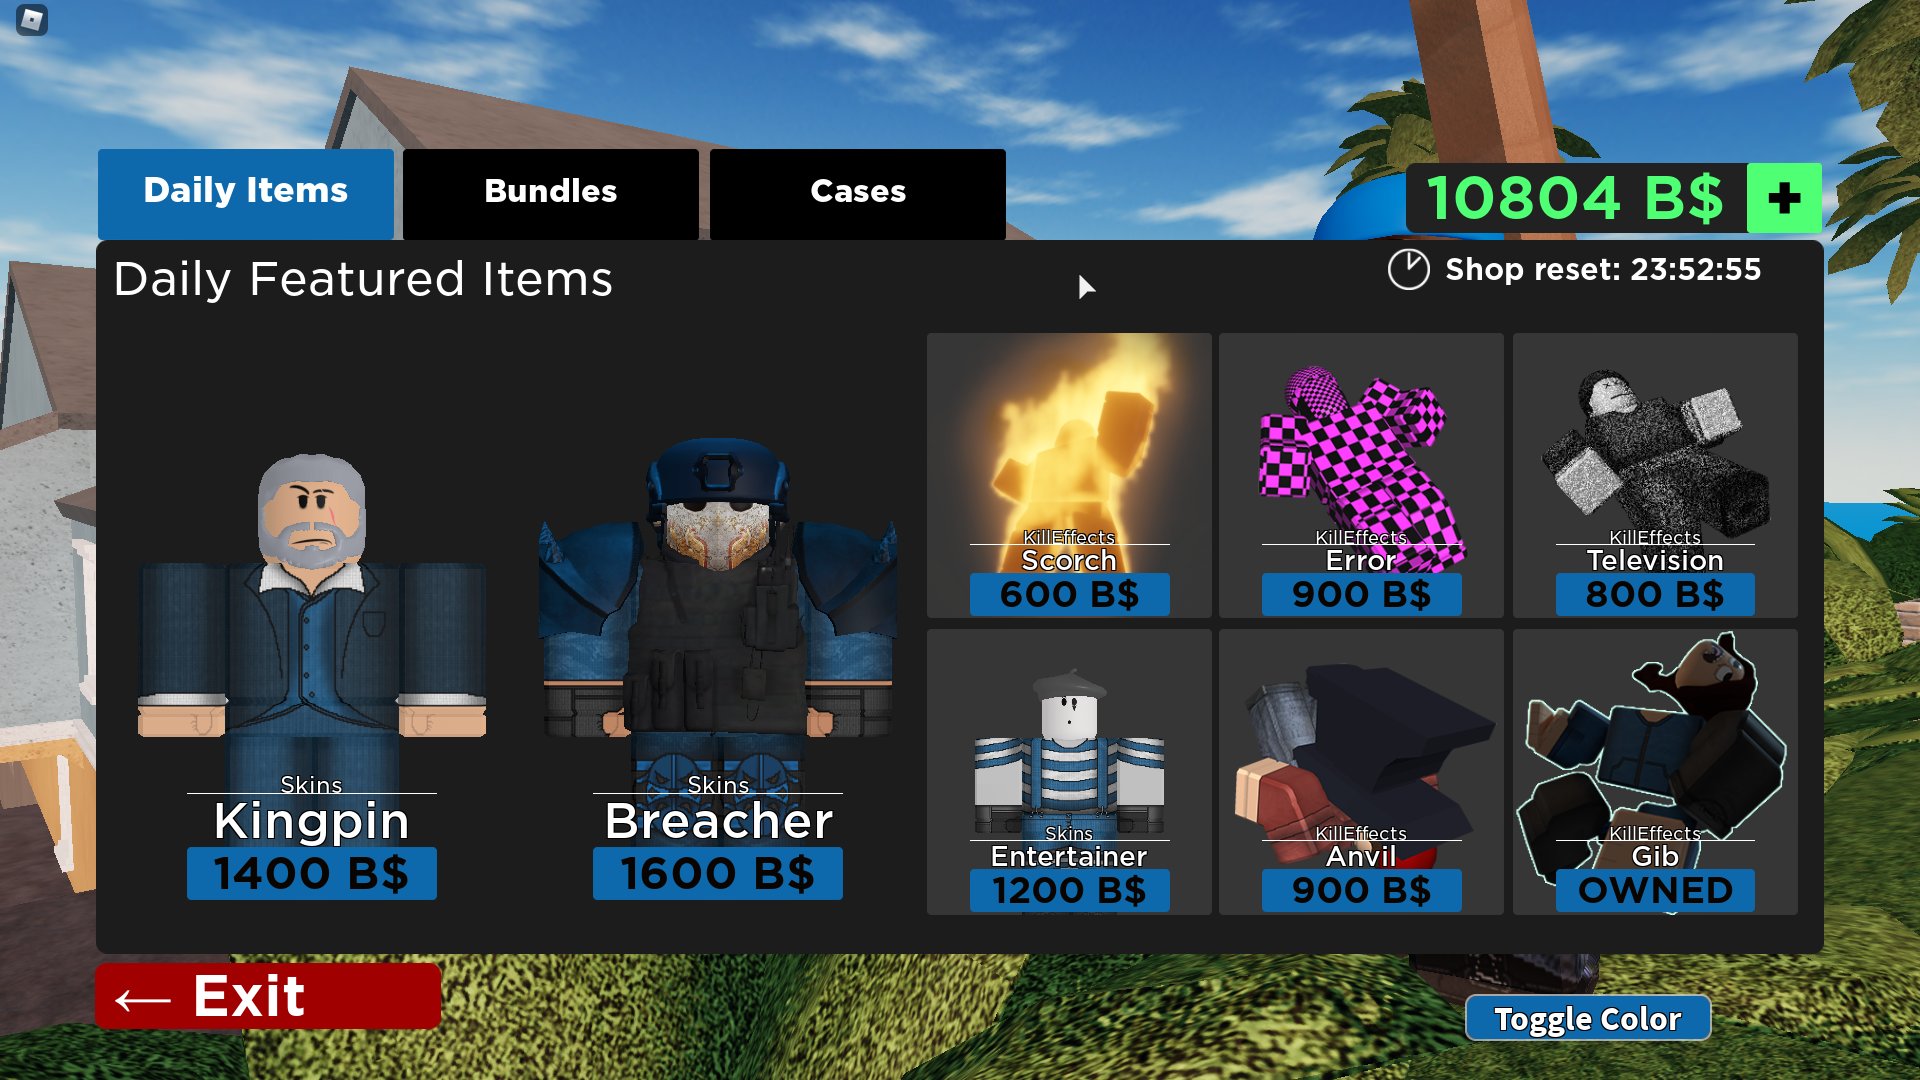 Arsenal Daily Shop On Twitter Roblox Robloxarsenal Arsenaldailyshop 06 20 2020 Summer Update Coming In A Few Hours - arsenal twitter roblox